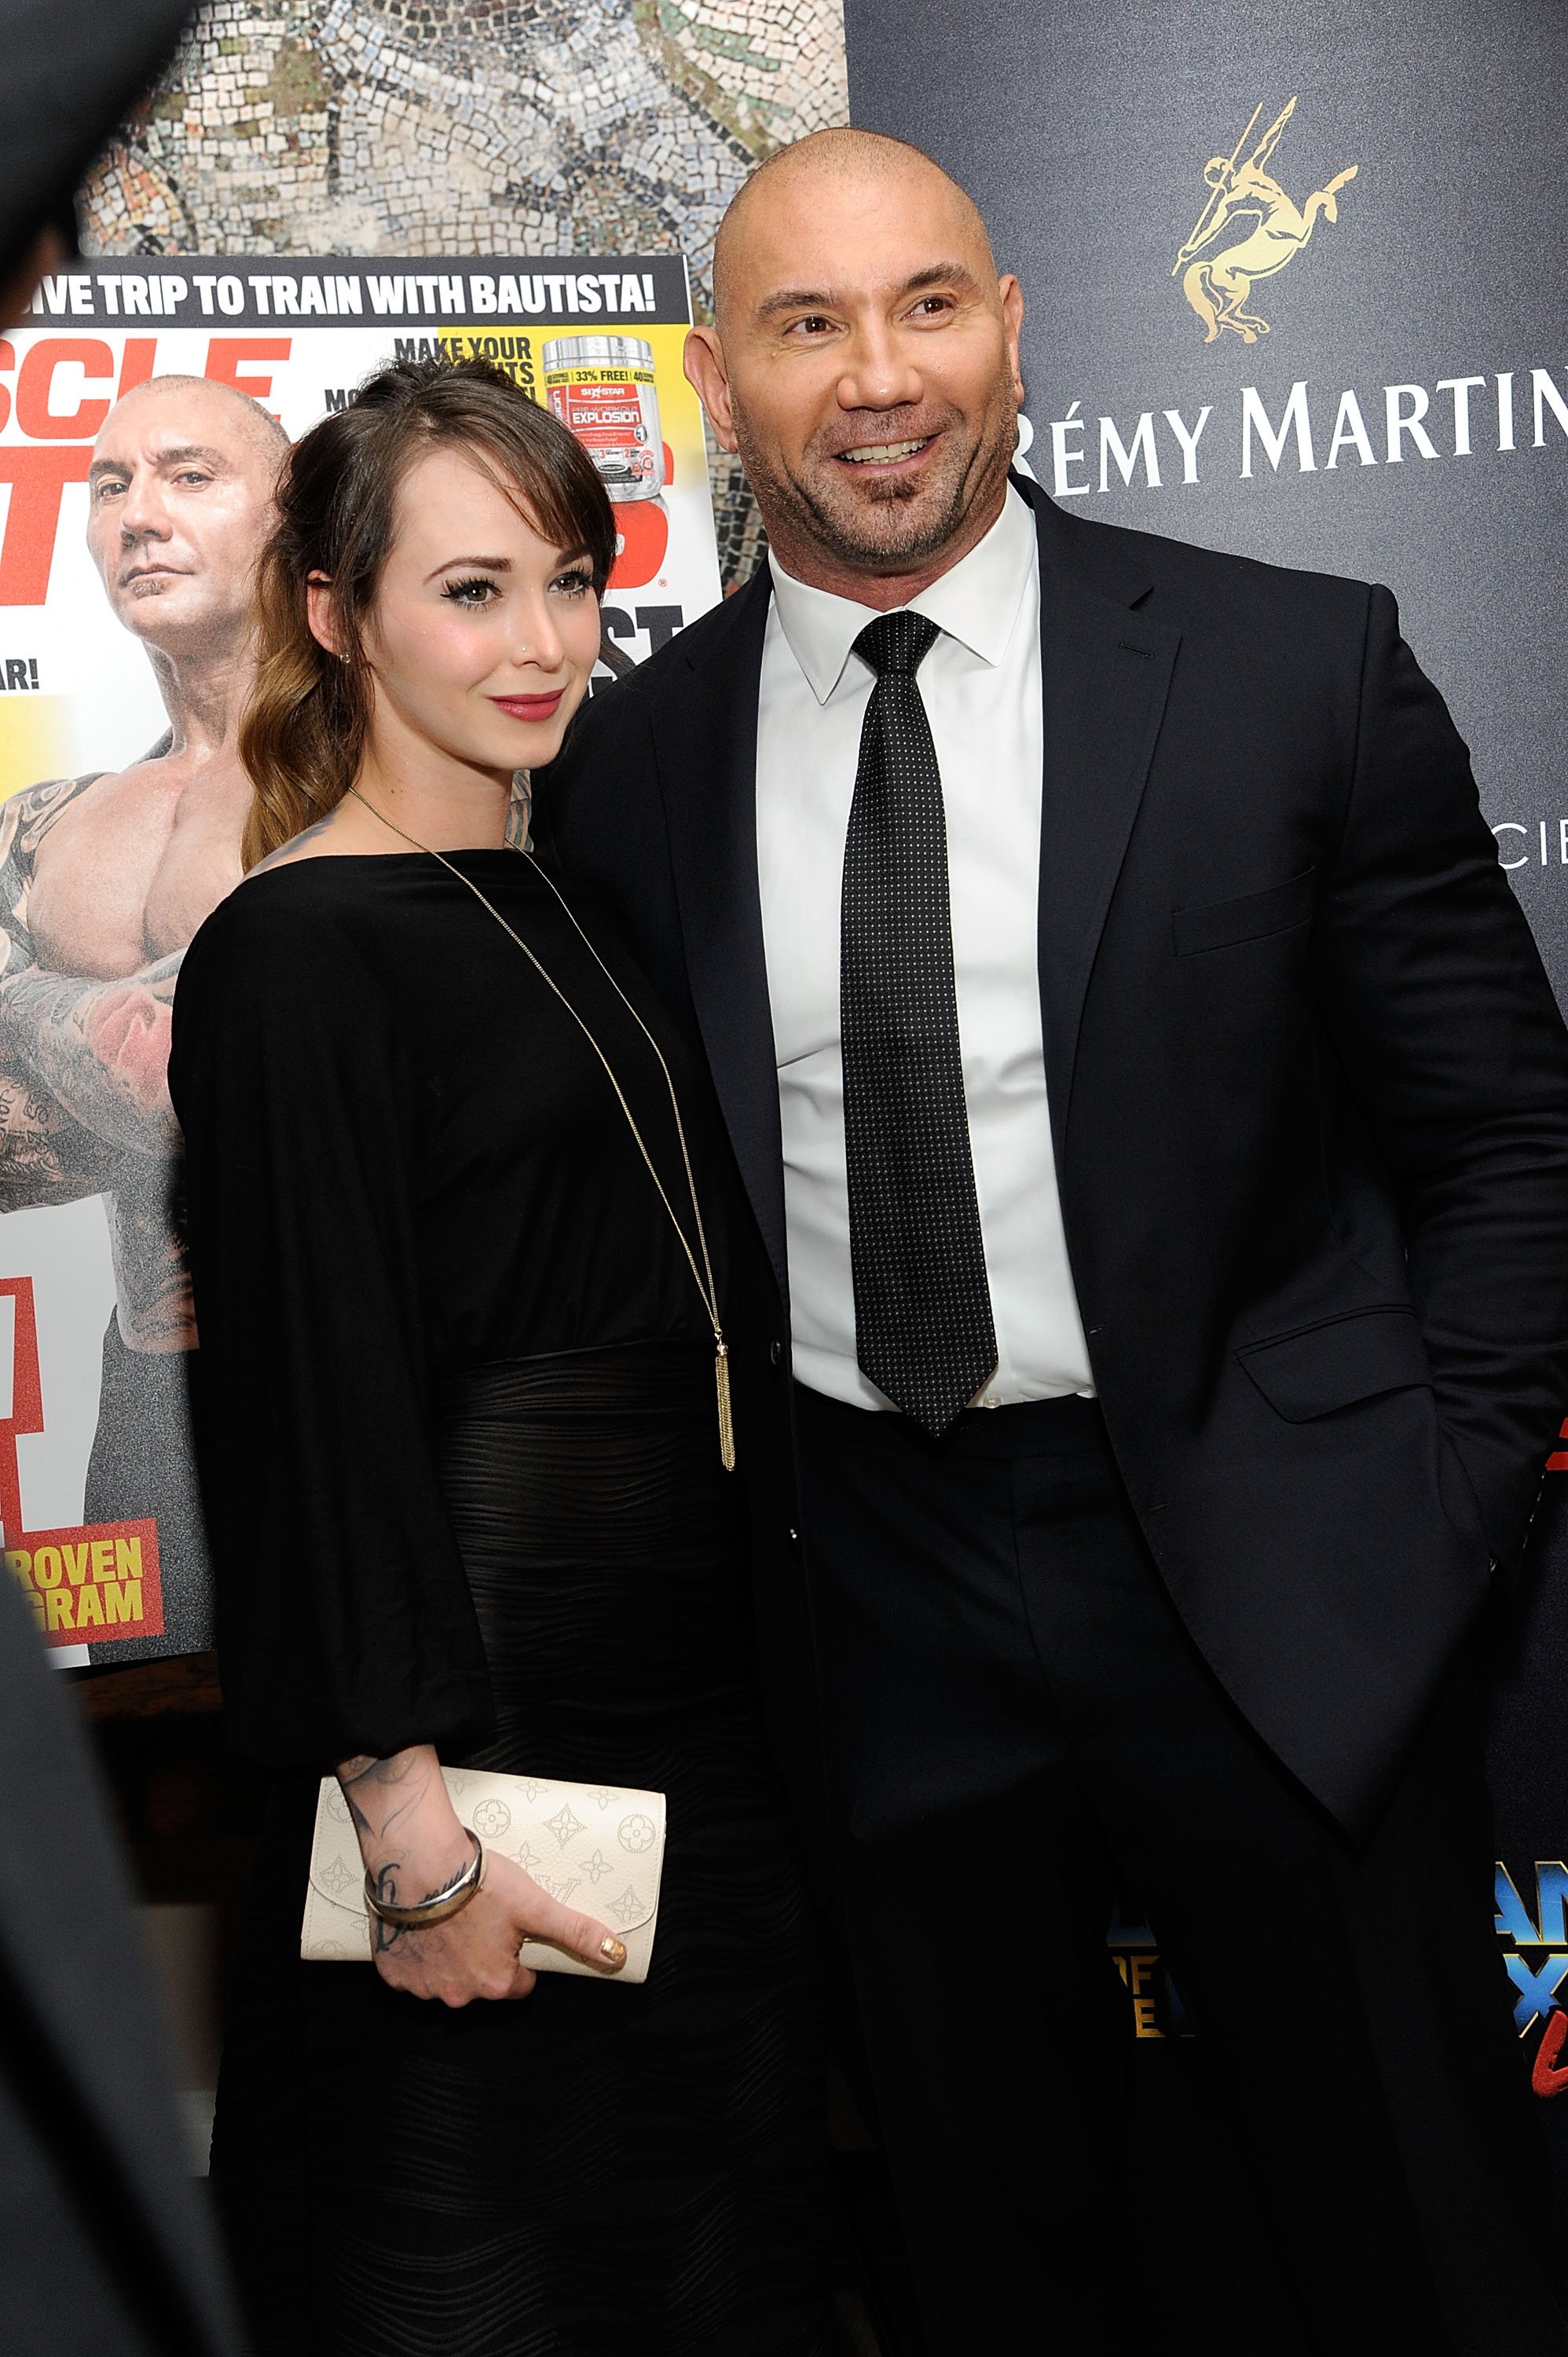 Dave Bautista and Sarah Jade at a screening of Marvel Studios' "Guardians Of The Galaxy Vol. 2" in 2017 in New York City. | Source: Getty Images